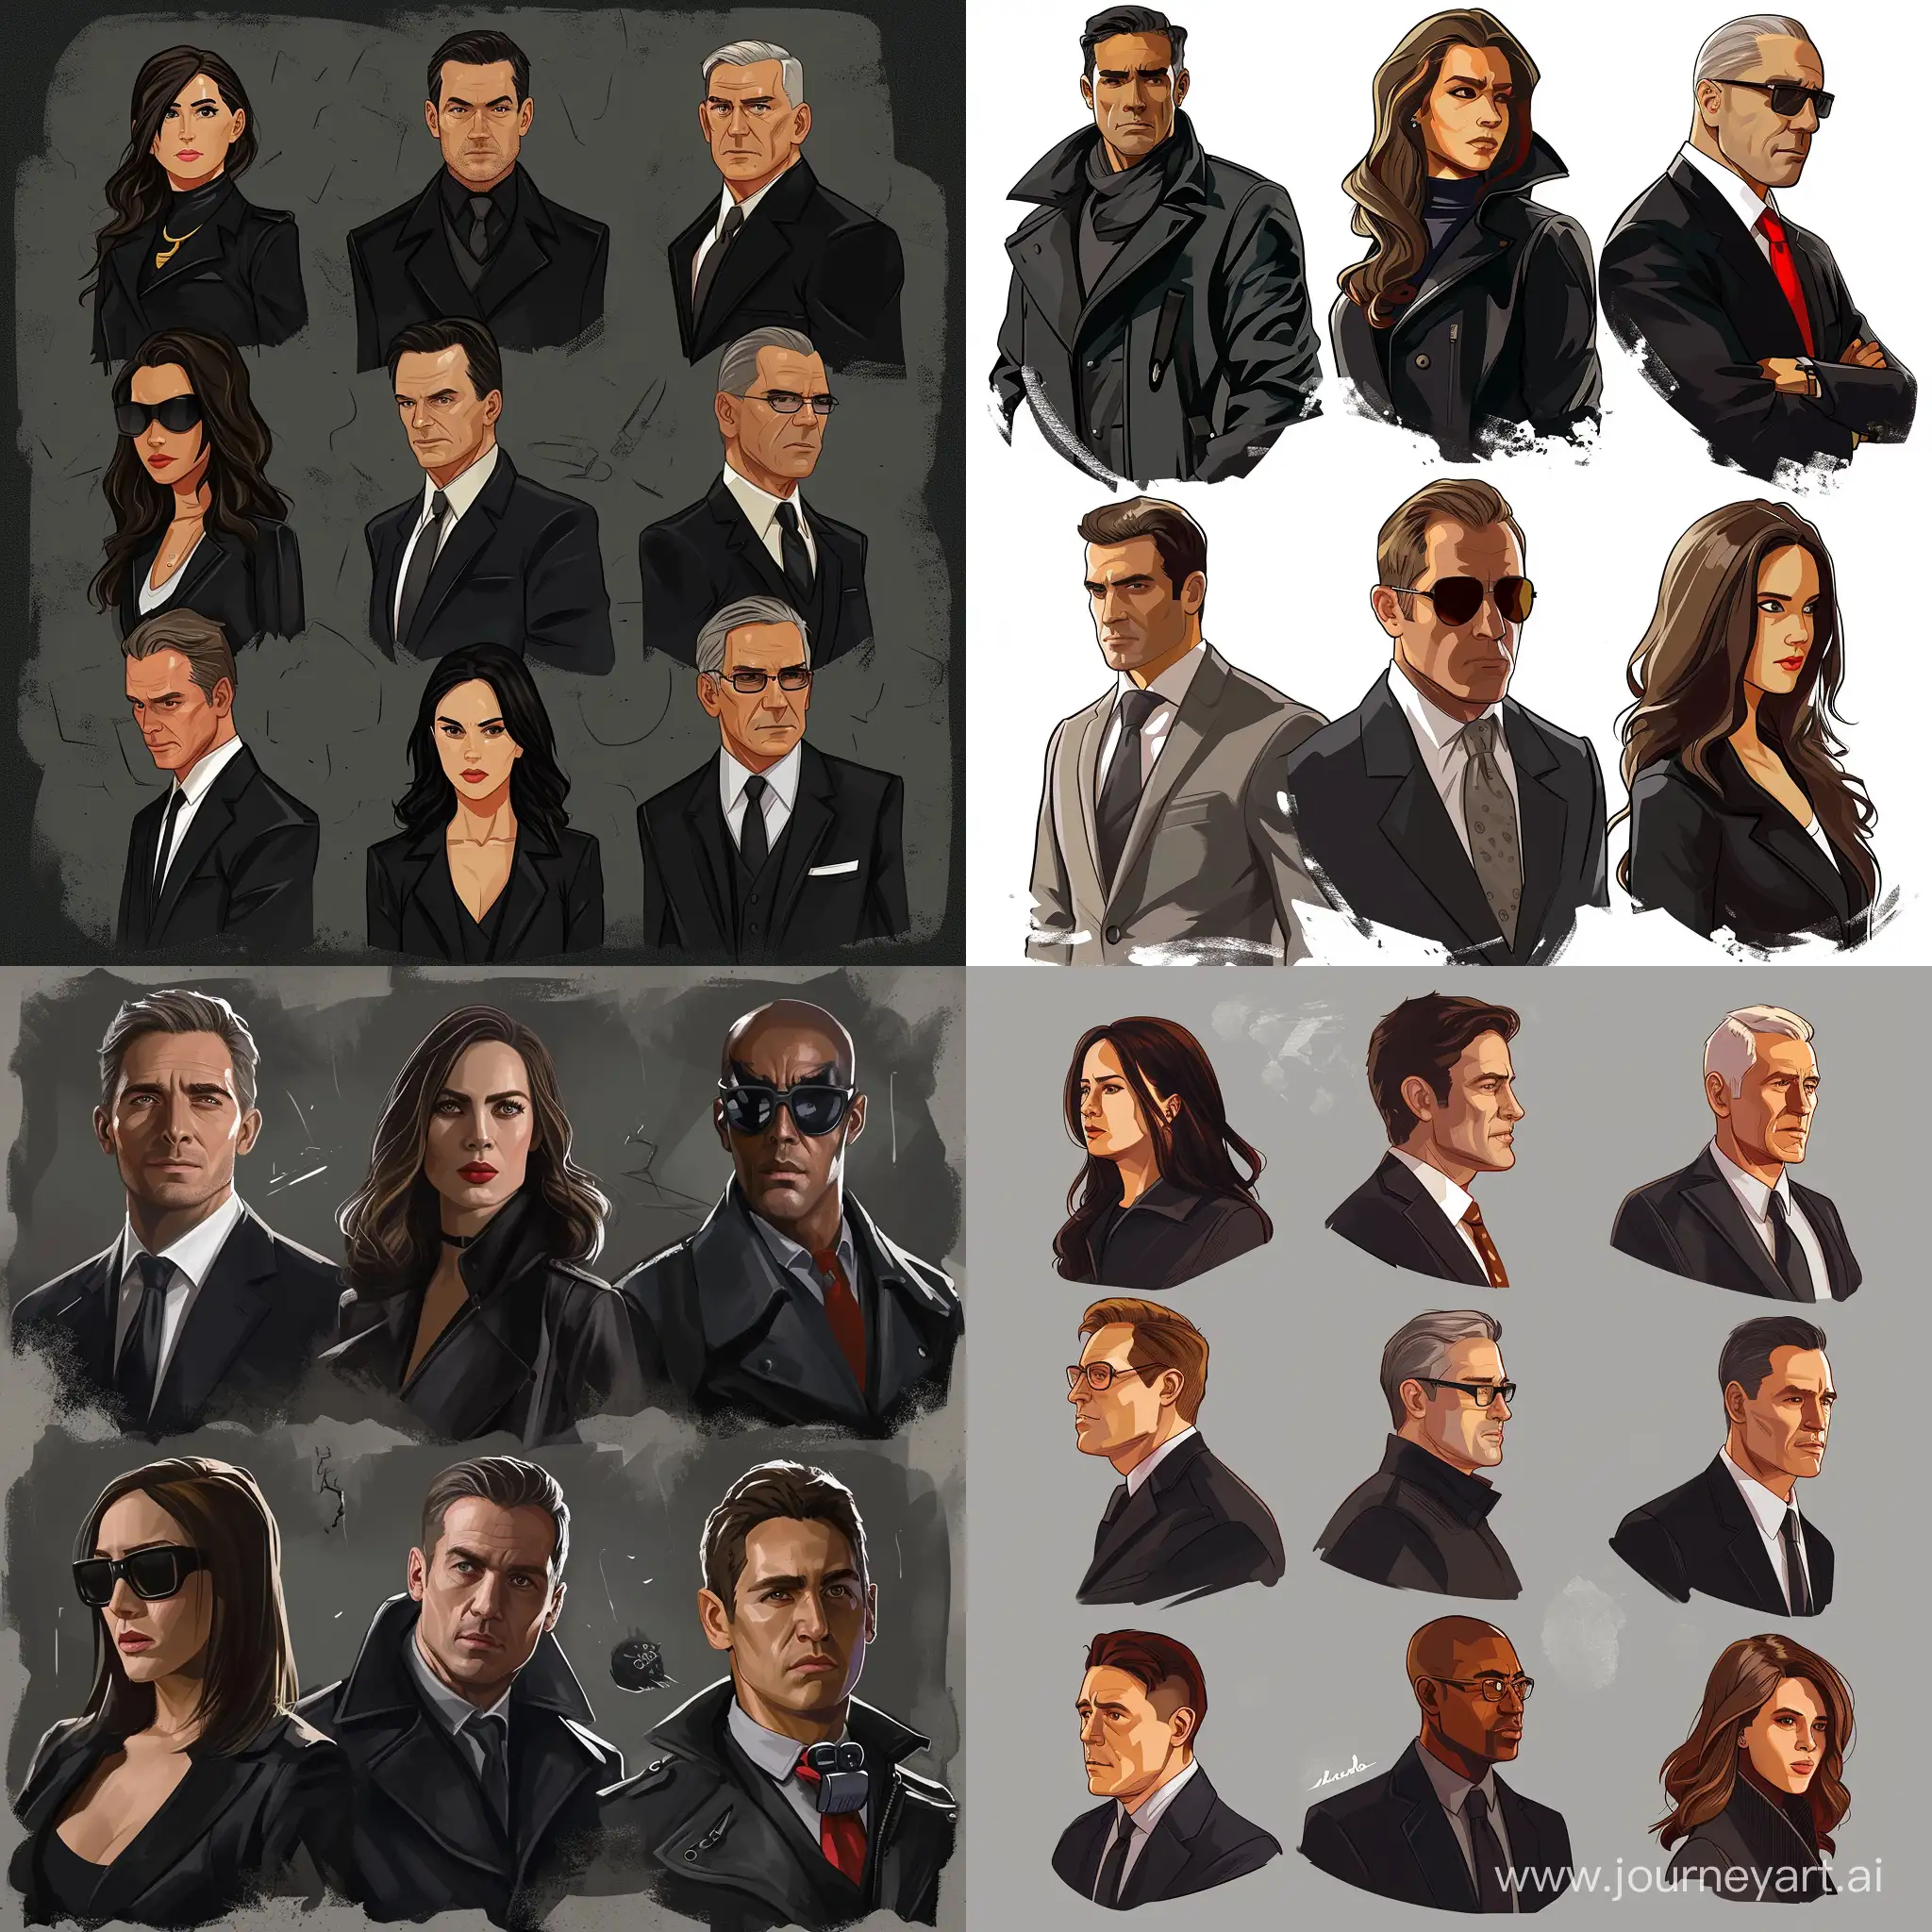 The blacklist characters!